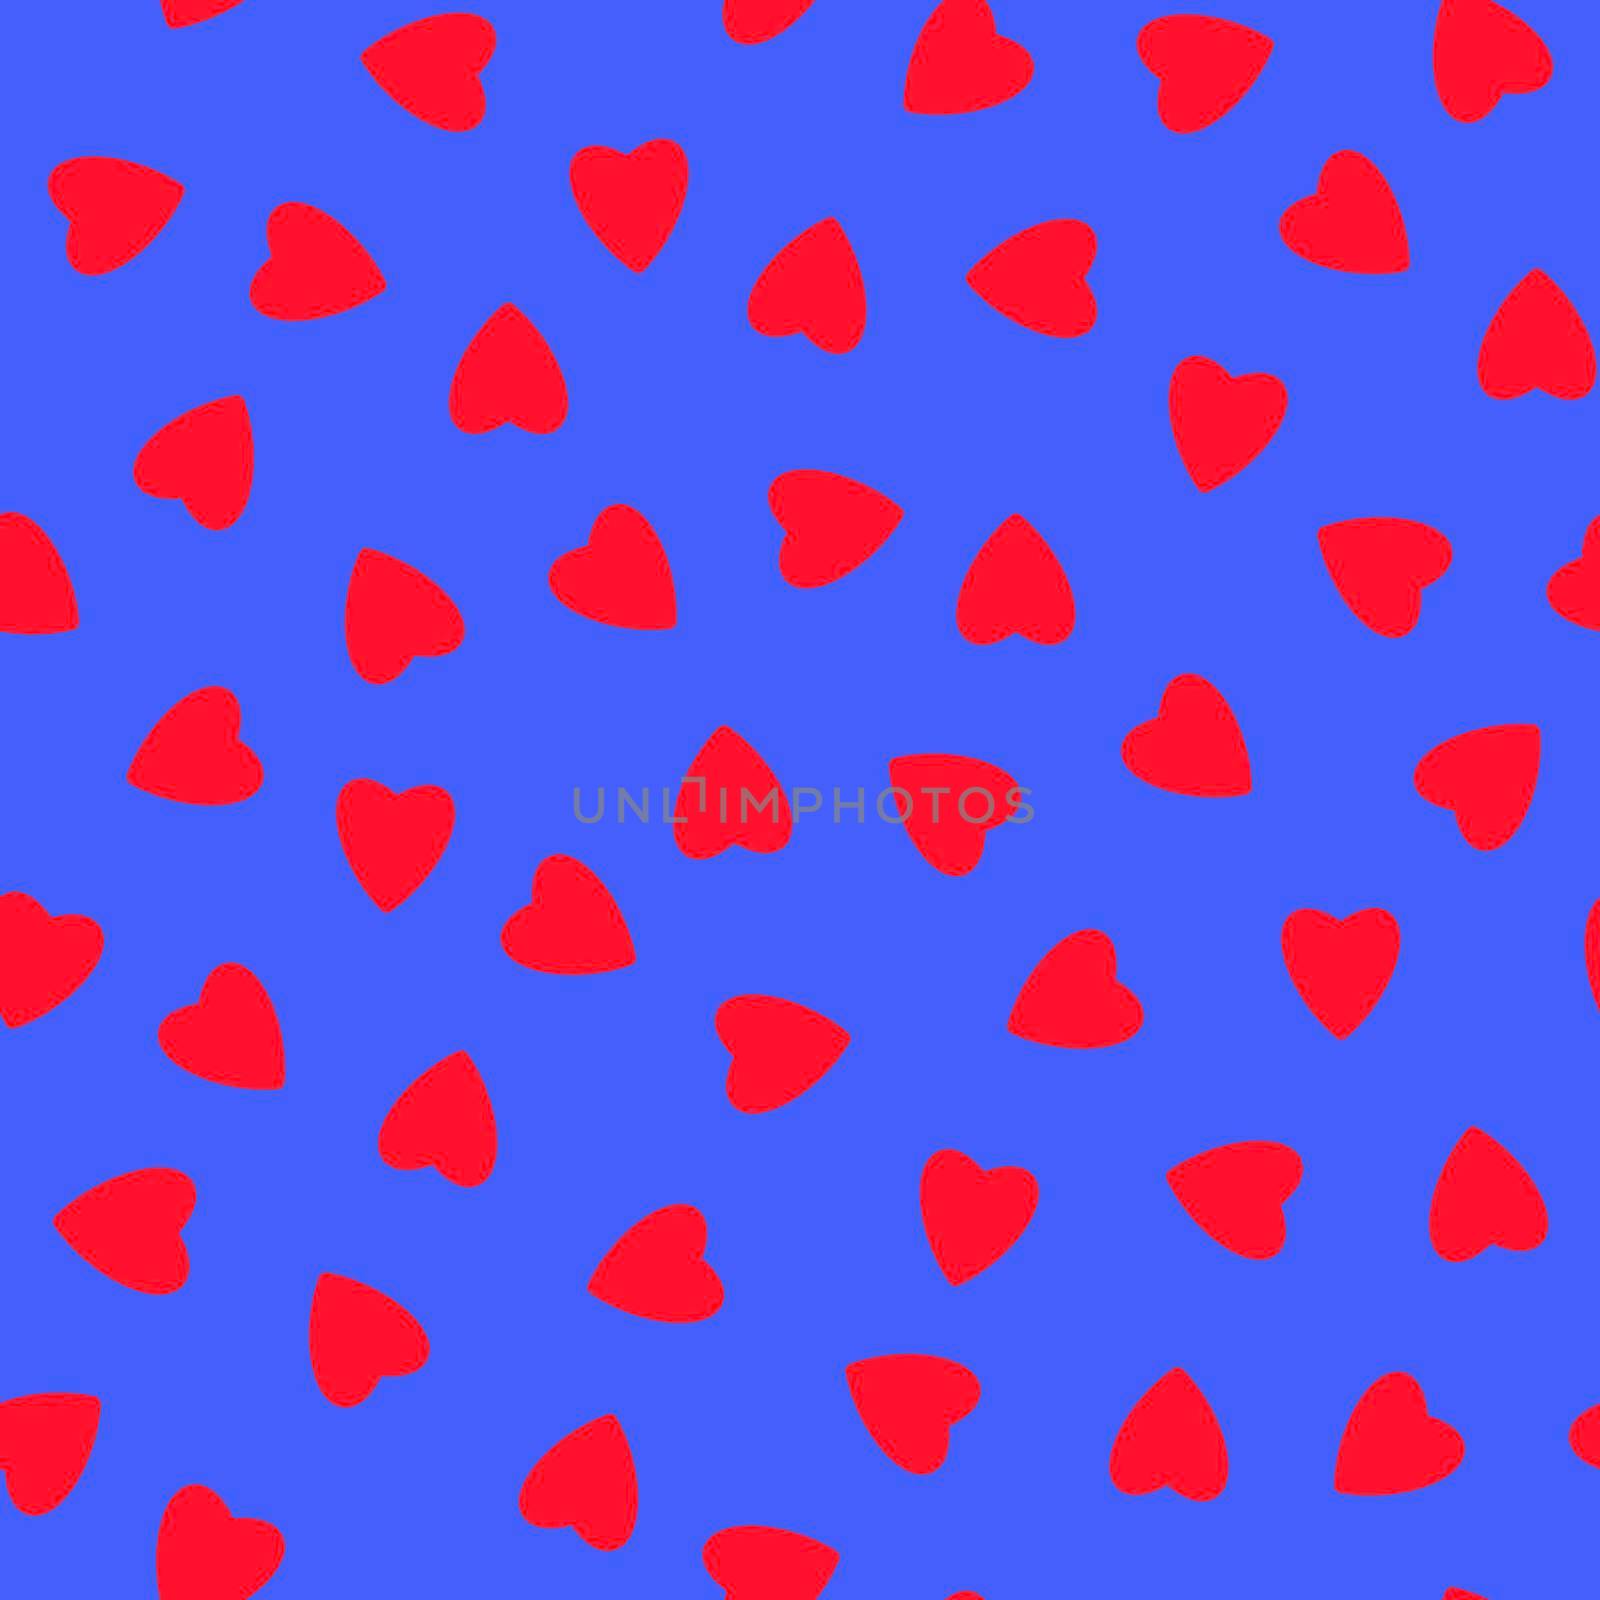 Simple hearts seamless pattern,endless chaotic texture made of tiny heart silhouettes.Valentines,mothers day background.Great for Easter,wedding,scrapbook,gift wrapping paper,textiles.Red on blue by Angelsmoon